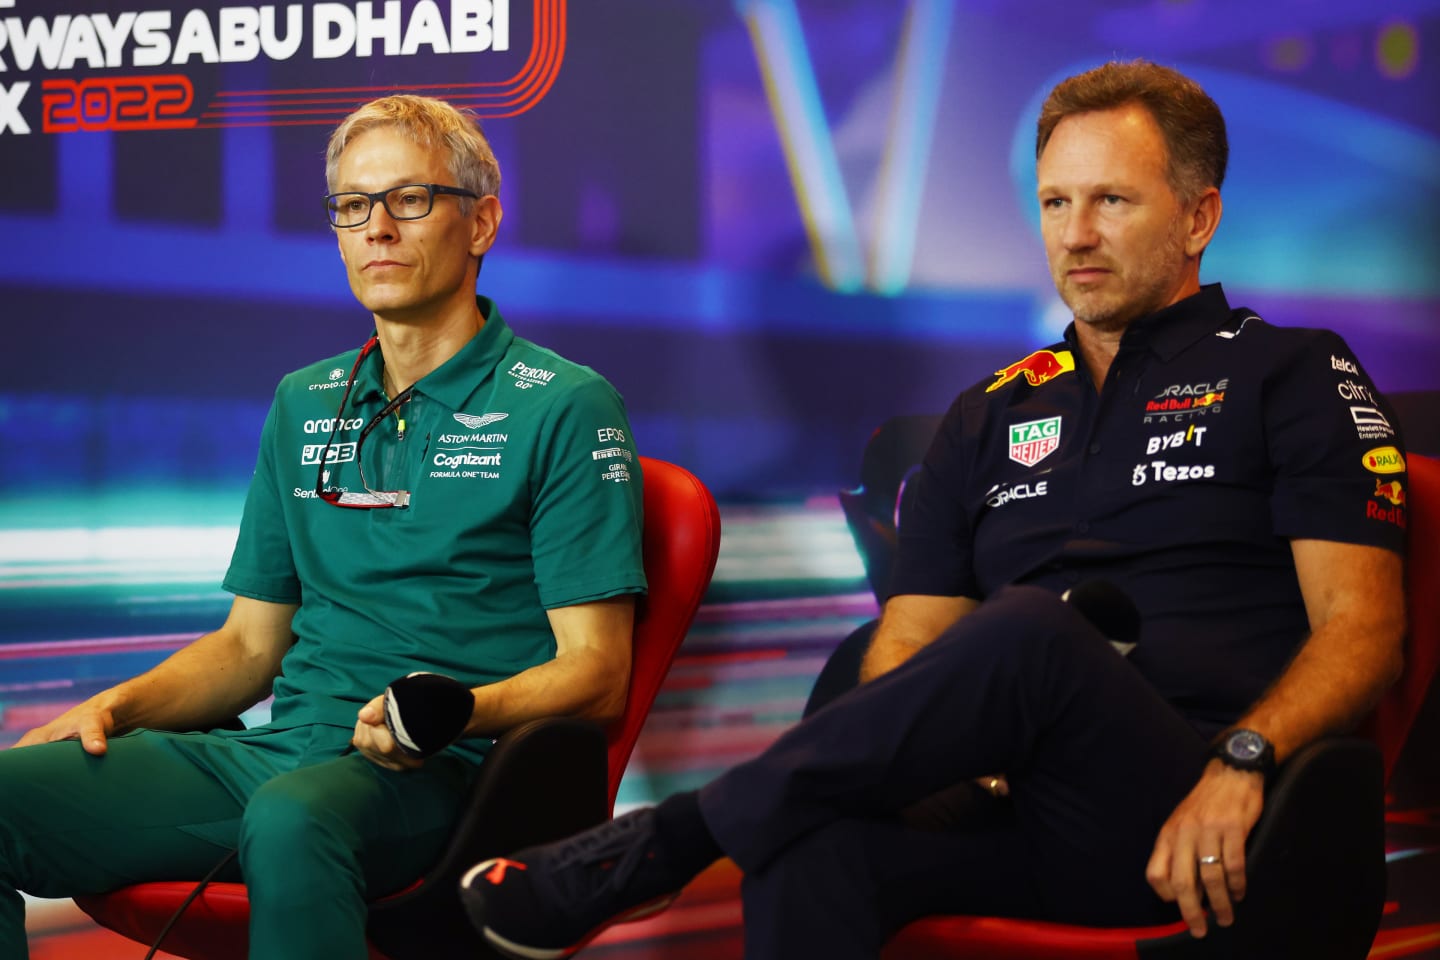 ABU DHABI, UNITED ARAB EMIRATES - NOVEMBER 19: Mike Krack, Team Principal of the Aston Martin F1 Team and Red Bull Racing Team Principal Christian Horner attend the Team Principals Press Conference prior to final practice ahead of the F1 Grand Prix of Abu Dhabi at Yas Marina Circuit on November 19, 2022 in Abu Dhabi, United Arab Emirates. (Photo by Bryn Lennon/Getty Images)